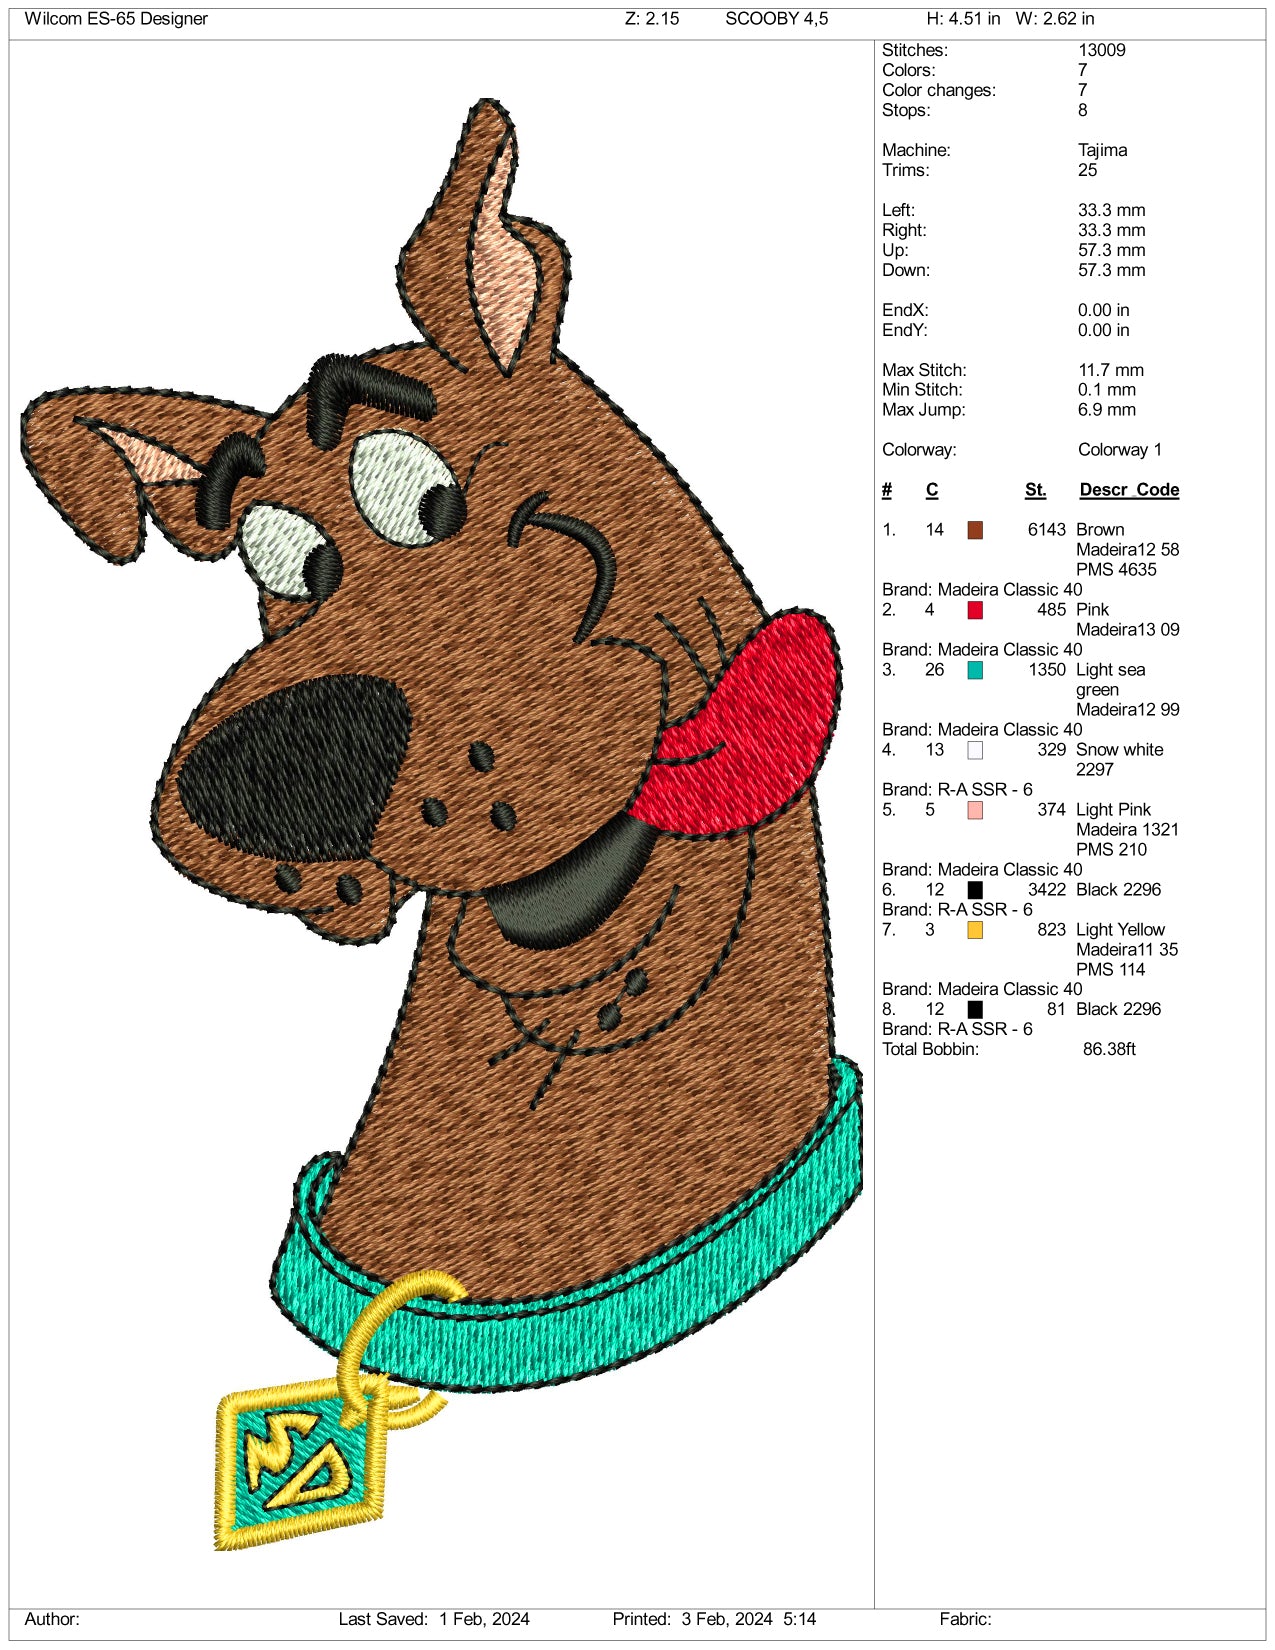 Scooby Doo Embroidery Design Files - 3 Size's